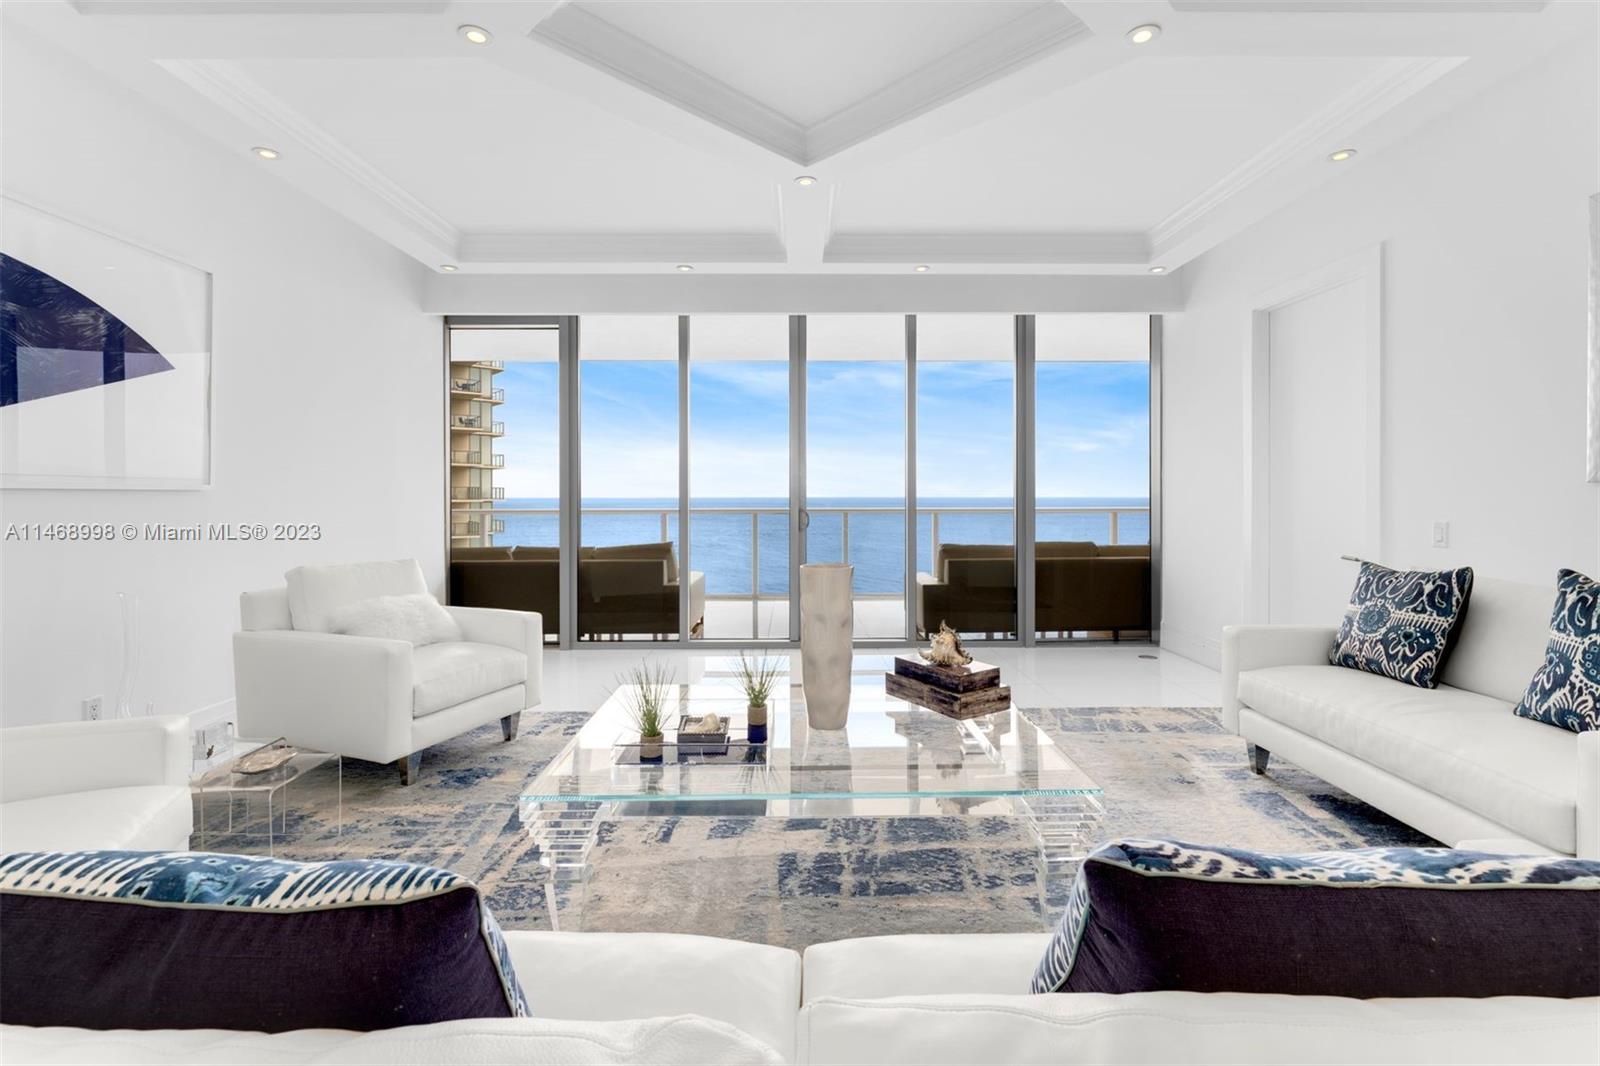 First time on the market! Incredible opportunity at the iconic St. Regis Bal Harbour. Gorgeous ocean front residence featuring flow-through floor plan with east and west terraces, 3 spacious bedrooms and  3 &amp; 1/2 bathrooms, stunning direct ocean views plus breathtaking sunset views of intracoastal/city skyline. Upgrades and high end finishes throughout with top-of-the-line appliances including open kitchen area, eat-in counter, dual wolf ovens, gas cooktop, Subzero refrigerator/ wine cooler and built-in Miele coffee machine. Enjoy exclusive 5 Stars 5 Diamonds resort amenities such as State of the art fitness center, Spa, Concierge &amp; Butler team, Pool &amp; Beach service , 24 hours in-room dining and much more. Best deal at St. Regis! Across from renowned Bal Harbour Shops.